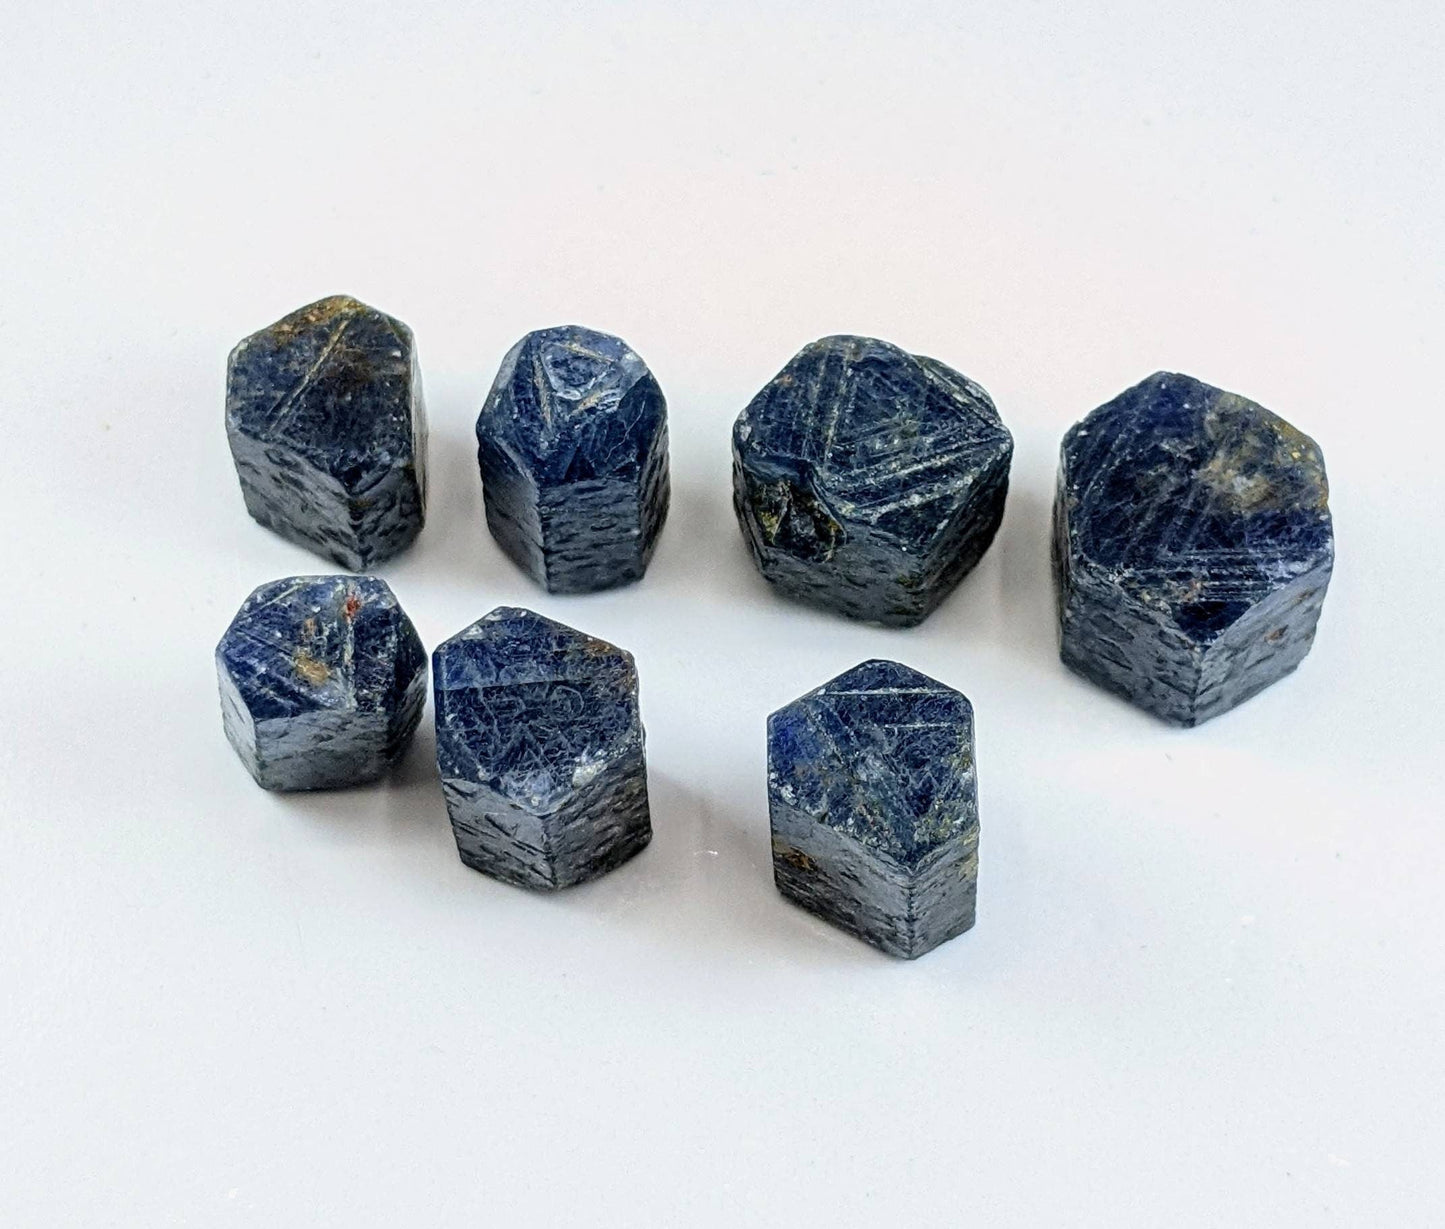 ARSAA GEMS AND MINERALSAn aesthetic Small lot of record keeper sapphire crystals, 16 grams - Premium  from ARSAA GEMS AND MINERALS - Just $40.00! Shop now at ARSAA GEMS AND MINERALS